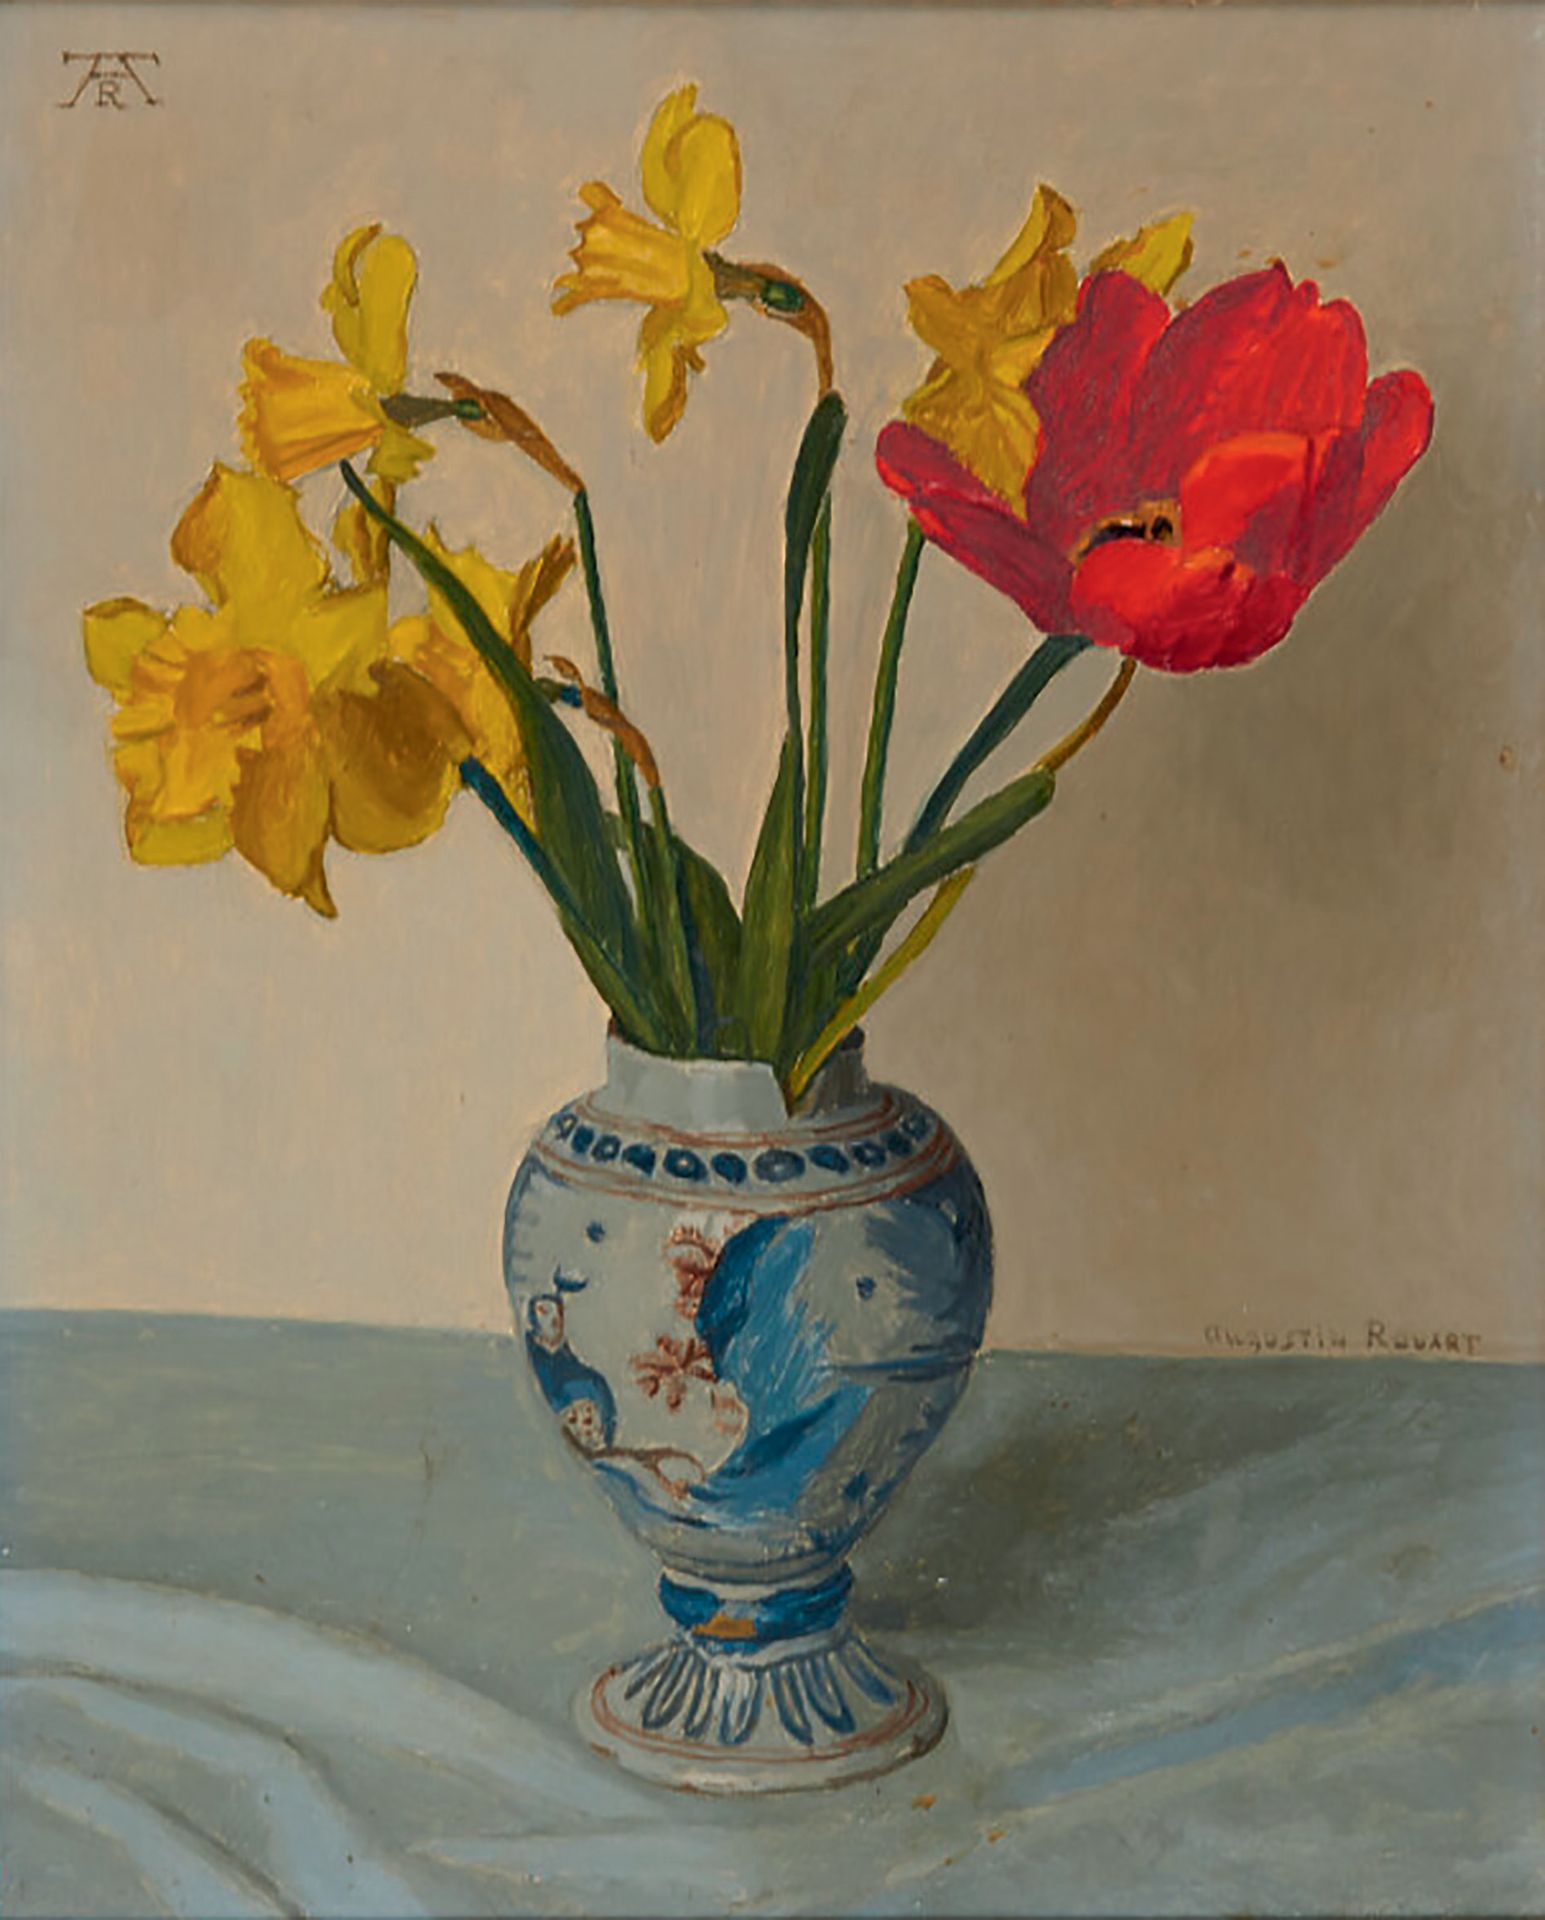 ROUART Augustin (1907-1997) "Flowers in a vase"
Oil on isorel panel signed with &hellip;